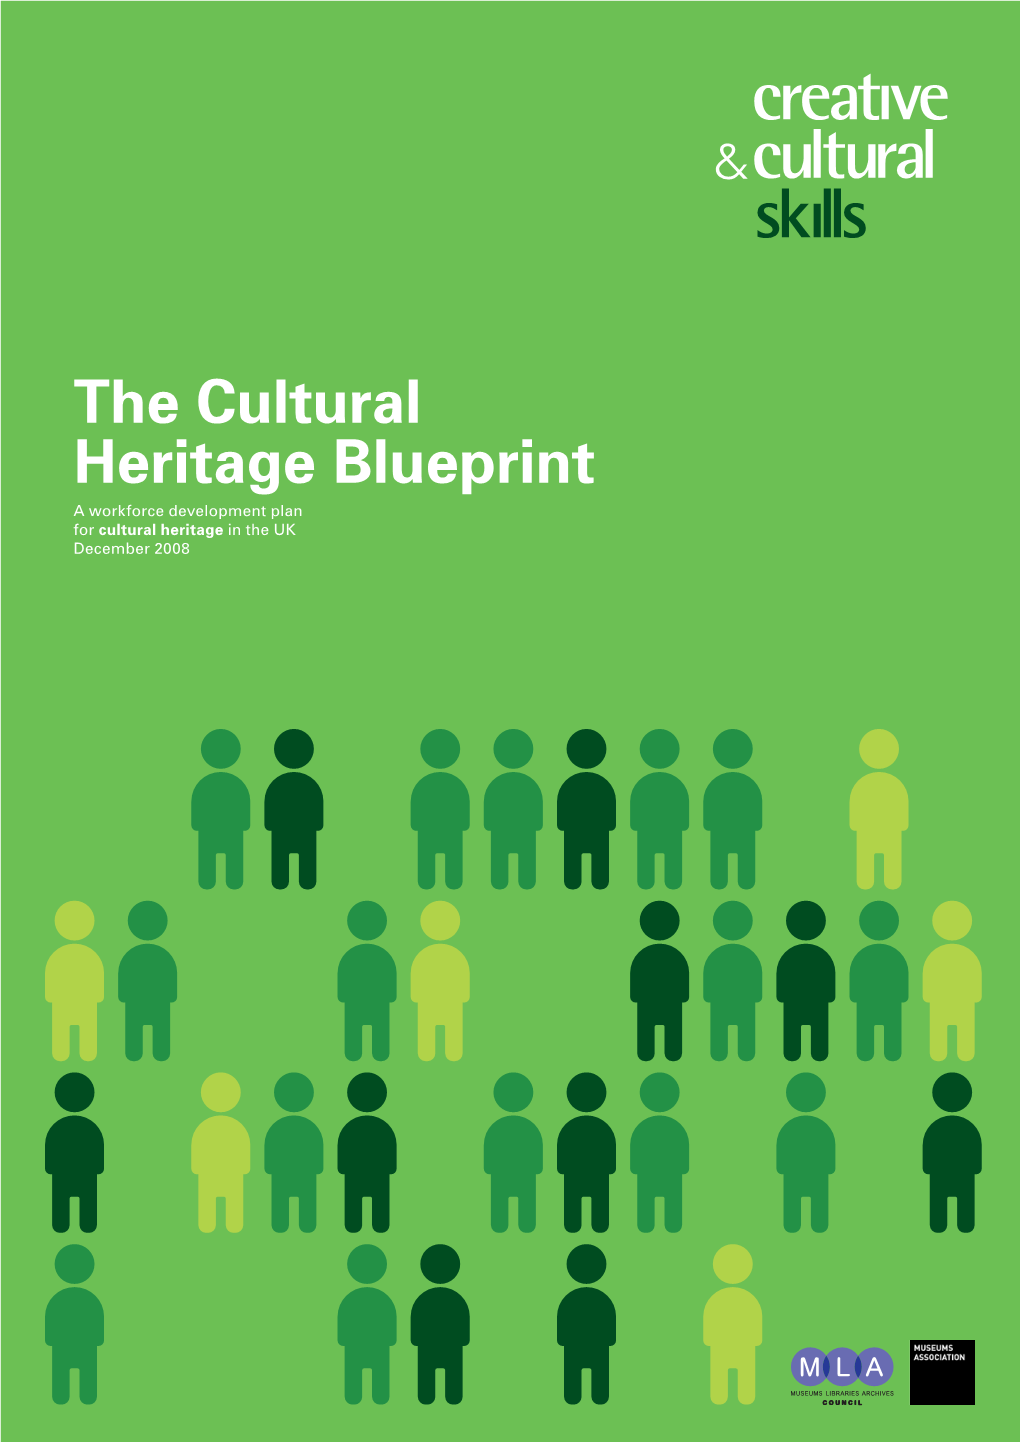 The Cultural Heritage Blueprint